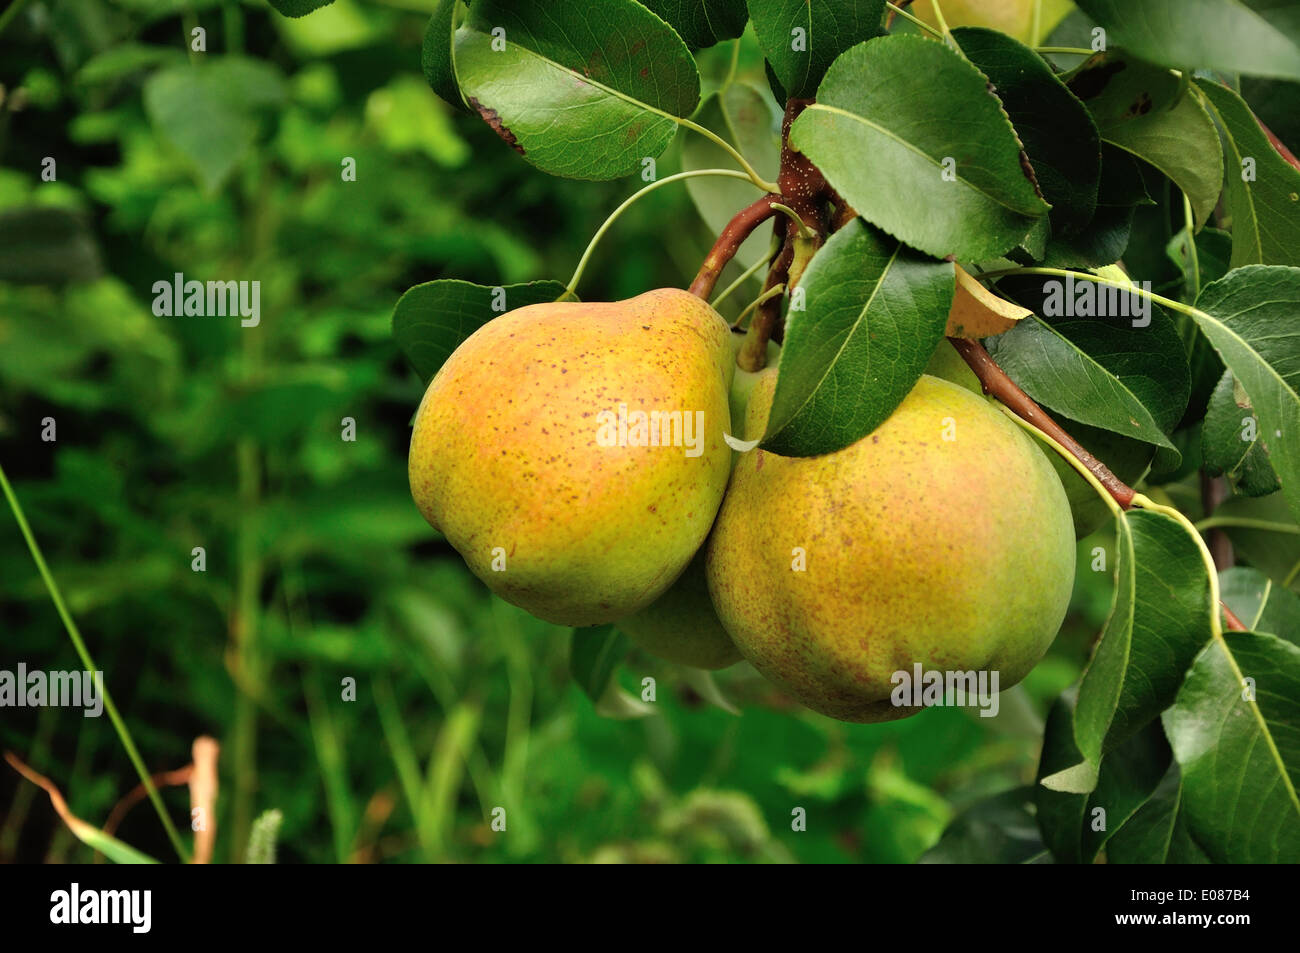 Two green and yellow pears on the branch growing Stock Photo